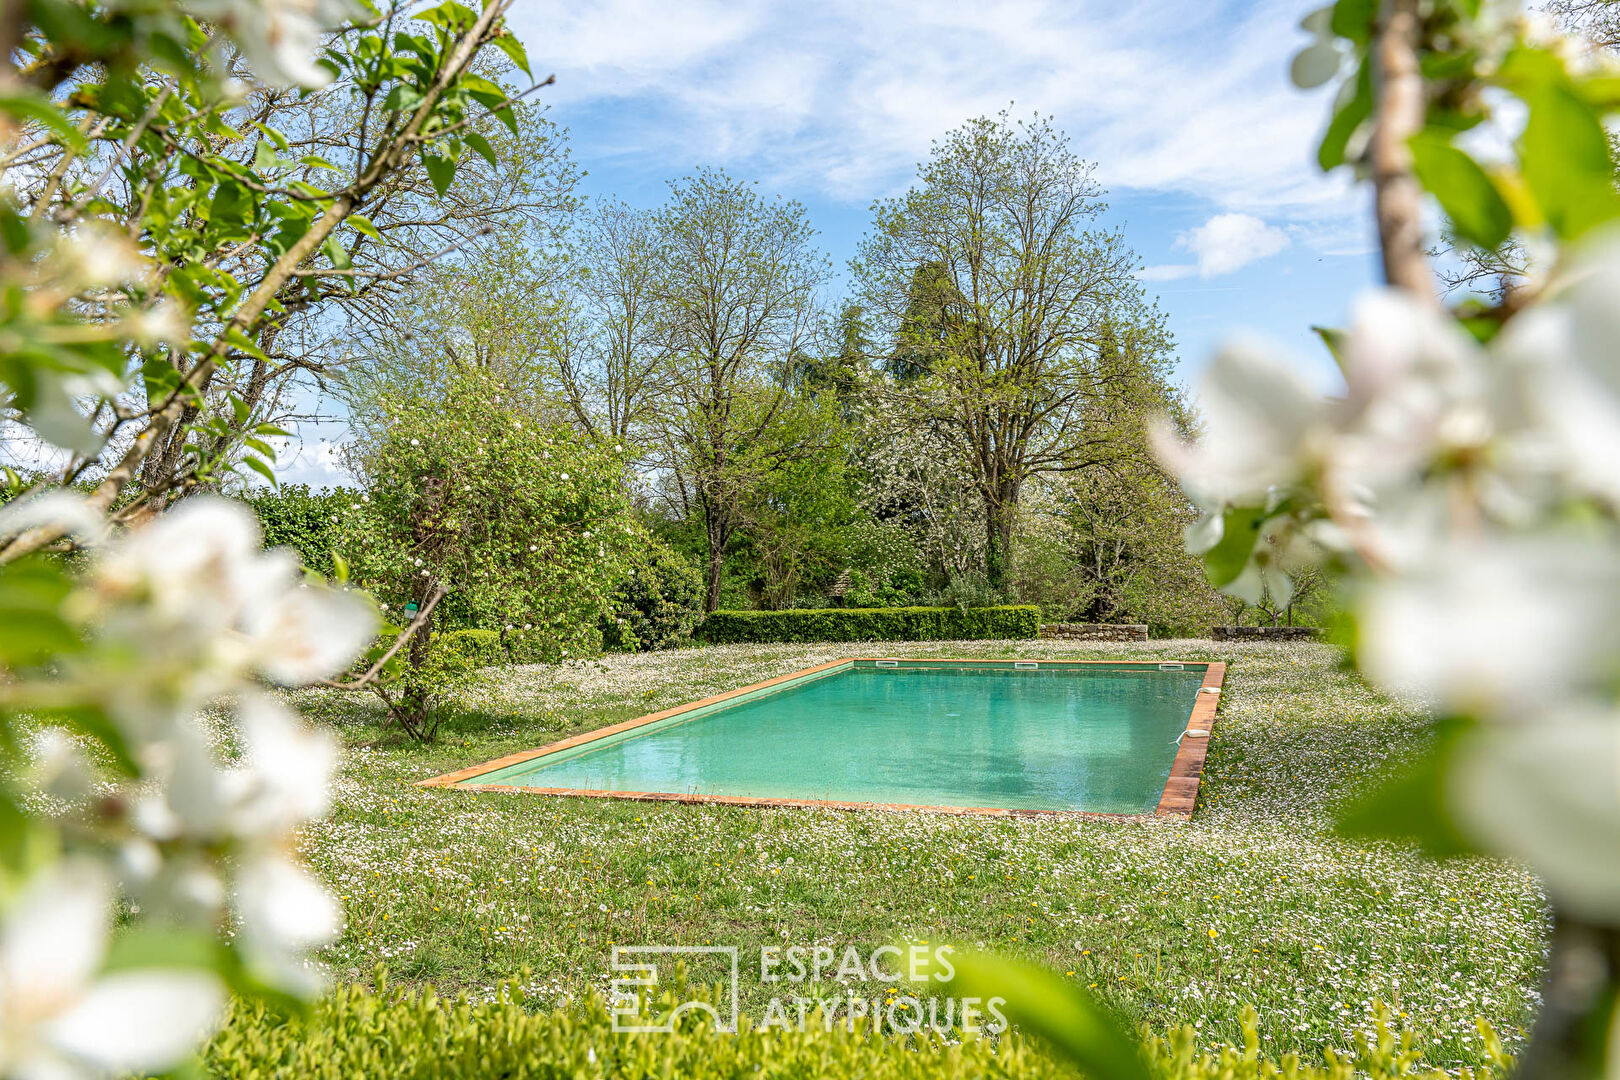 18th century bourgeois house, its outbuildings and its XXL swimming pool